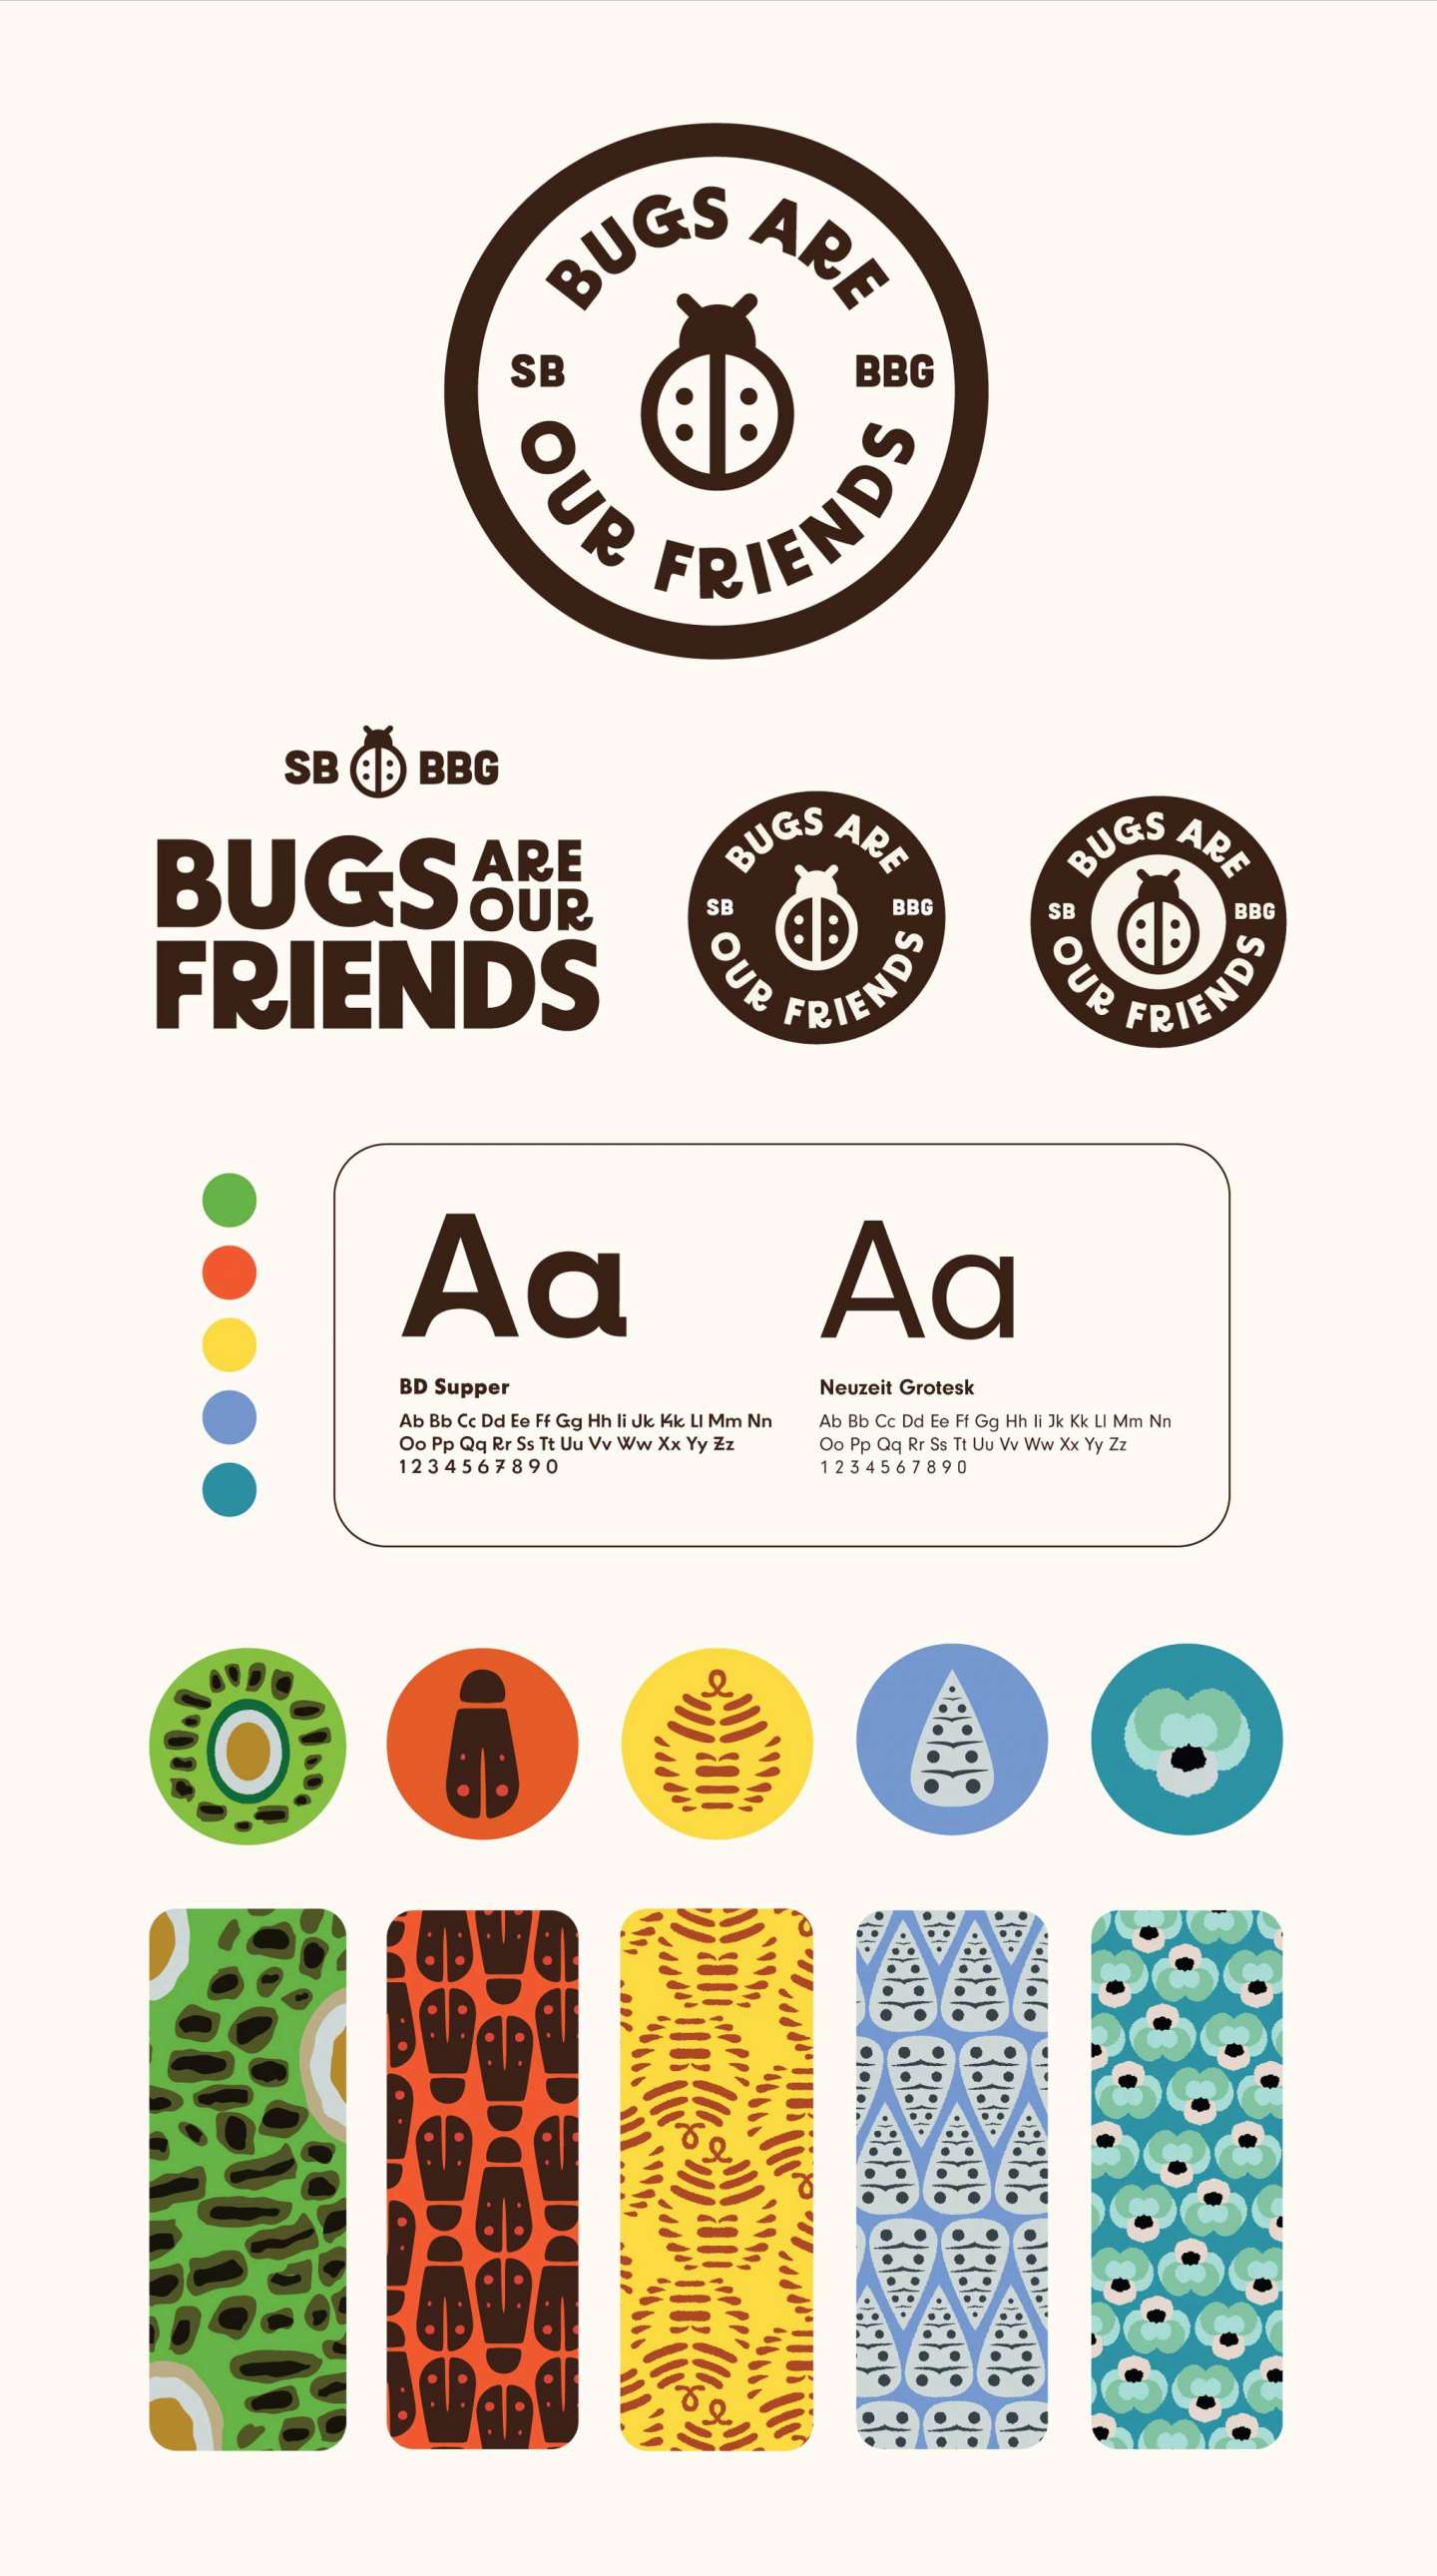 Bugs Are Our Friends Event Campaign